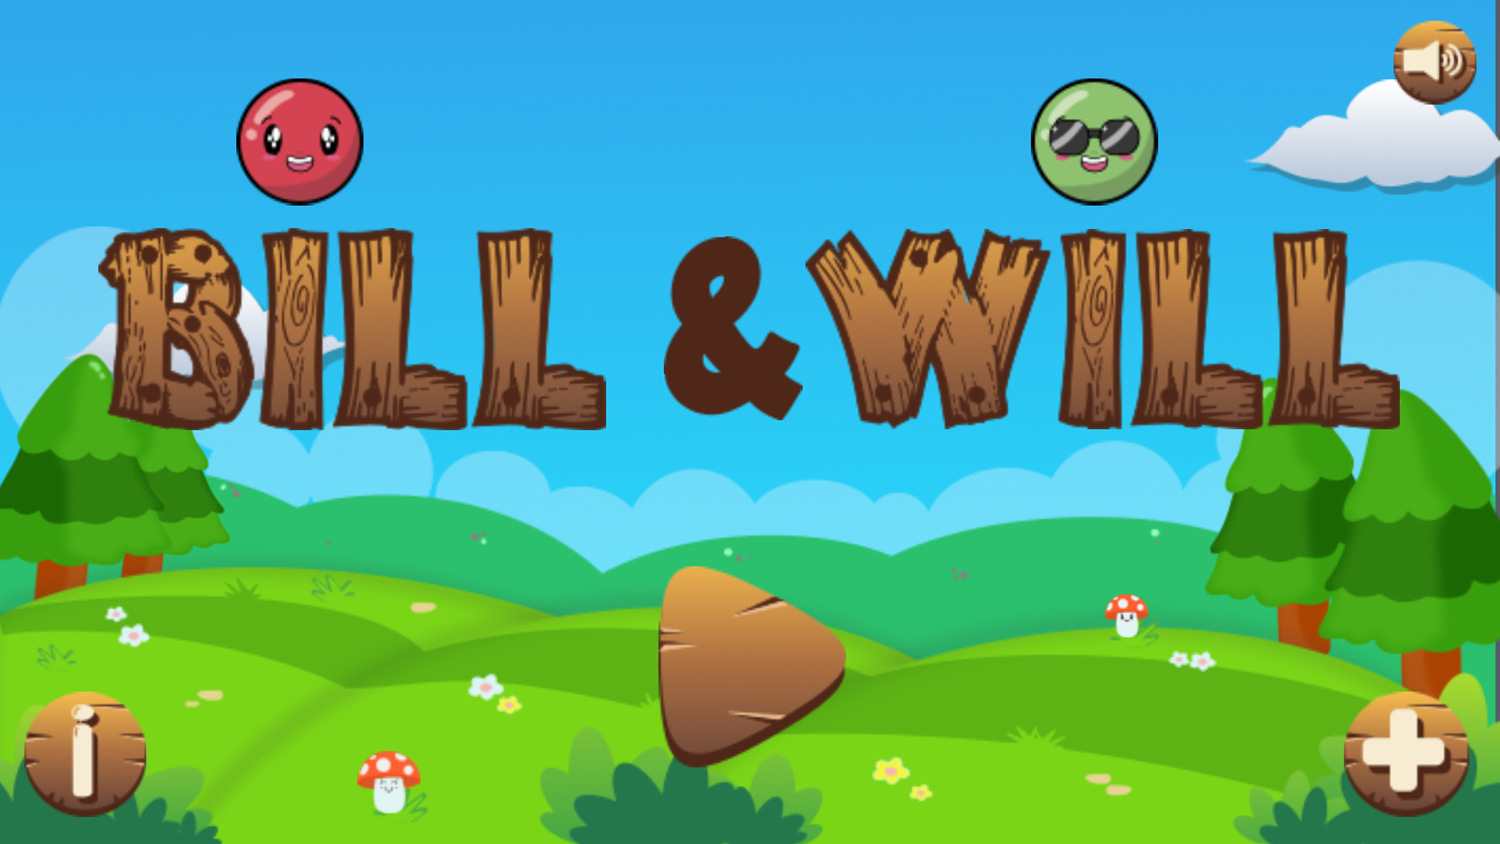 Bill and Will Game Welcome Screen Screenshot.